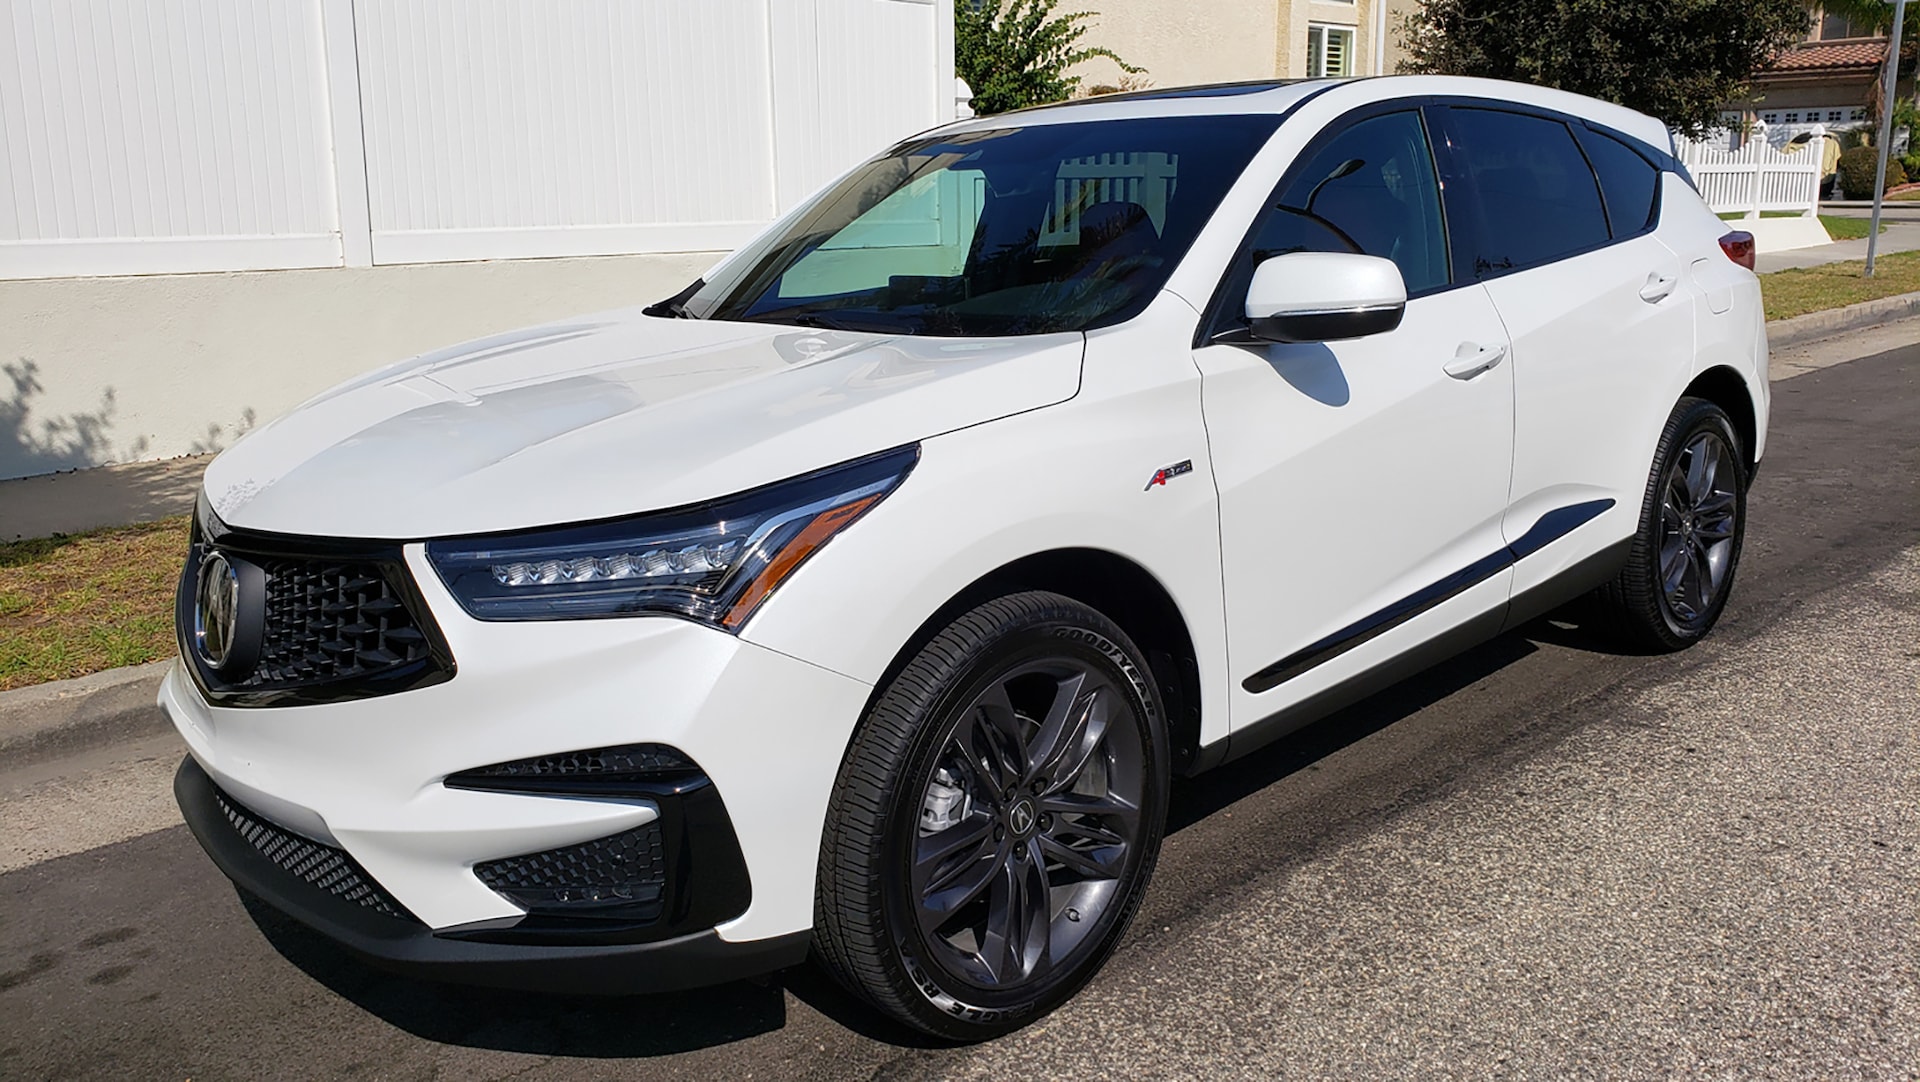 Review: 2020 Acura RDX SH-AWD A-Spec SUV Is Super Good